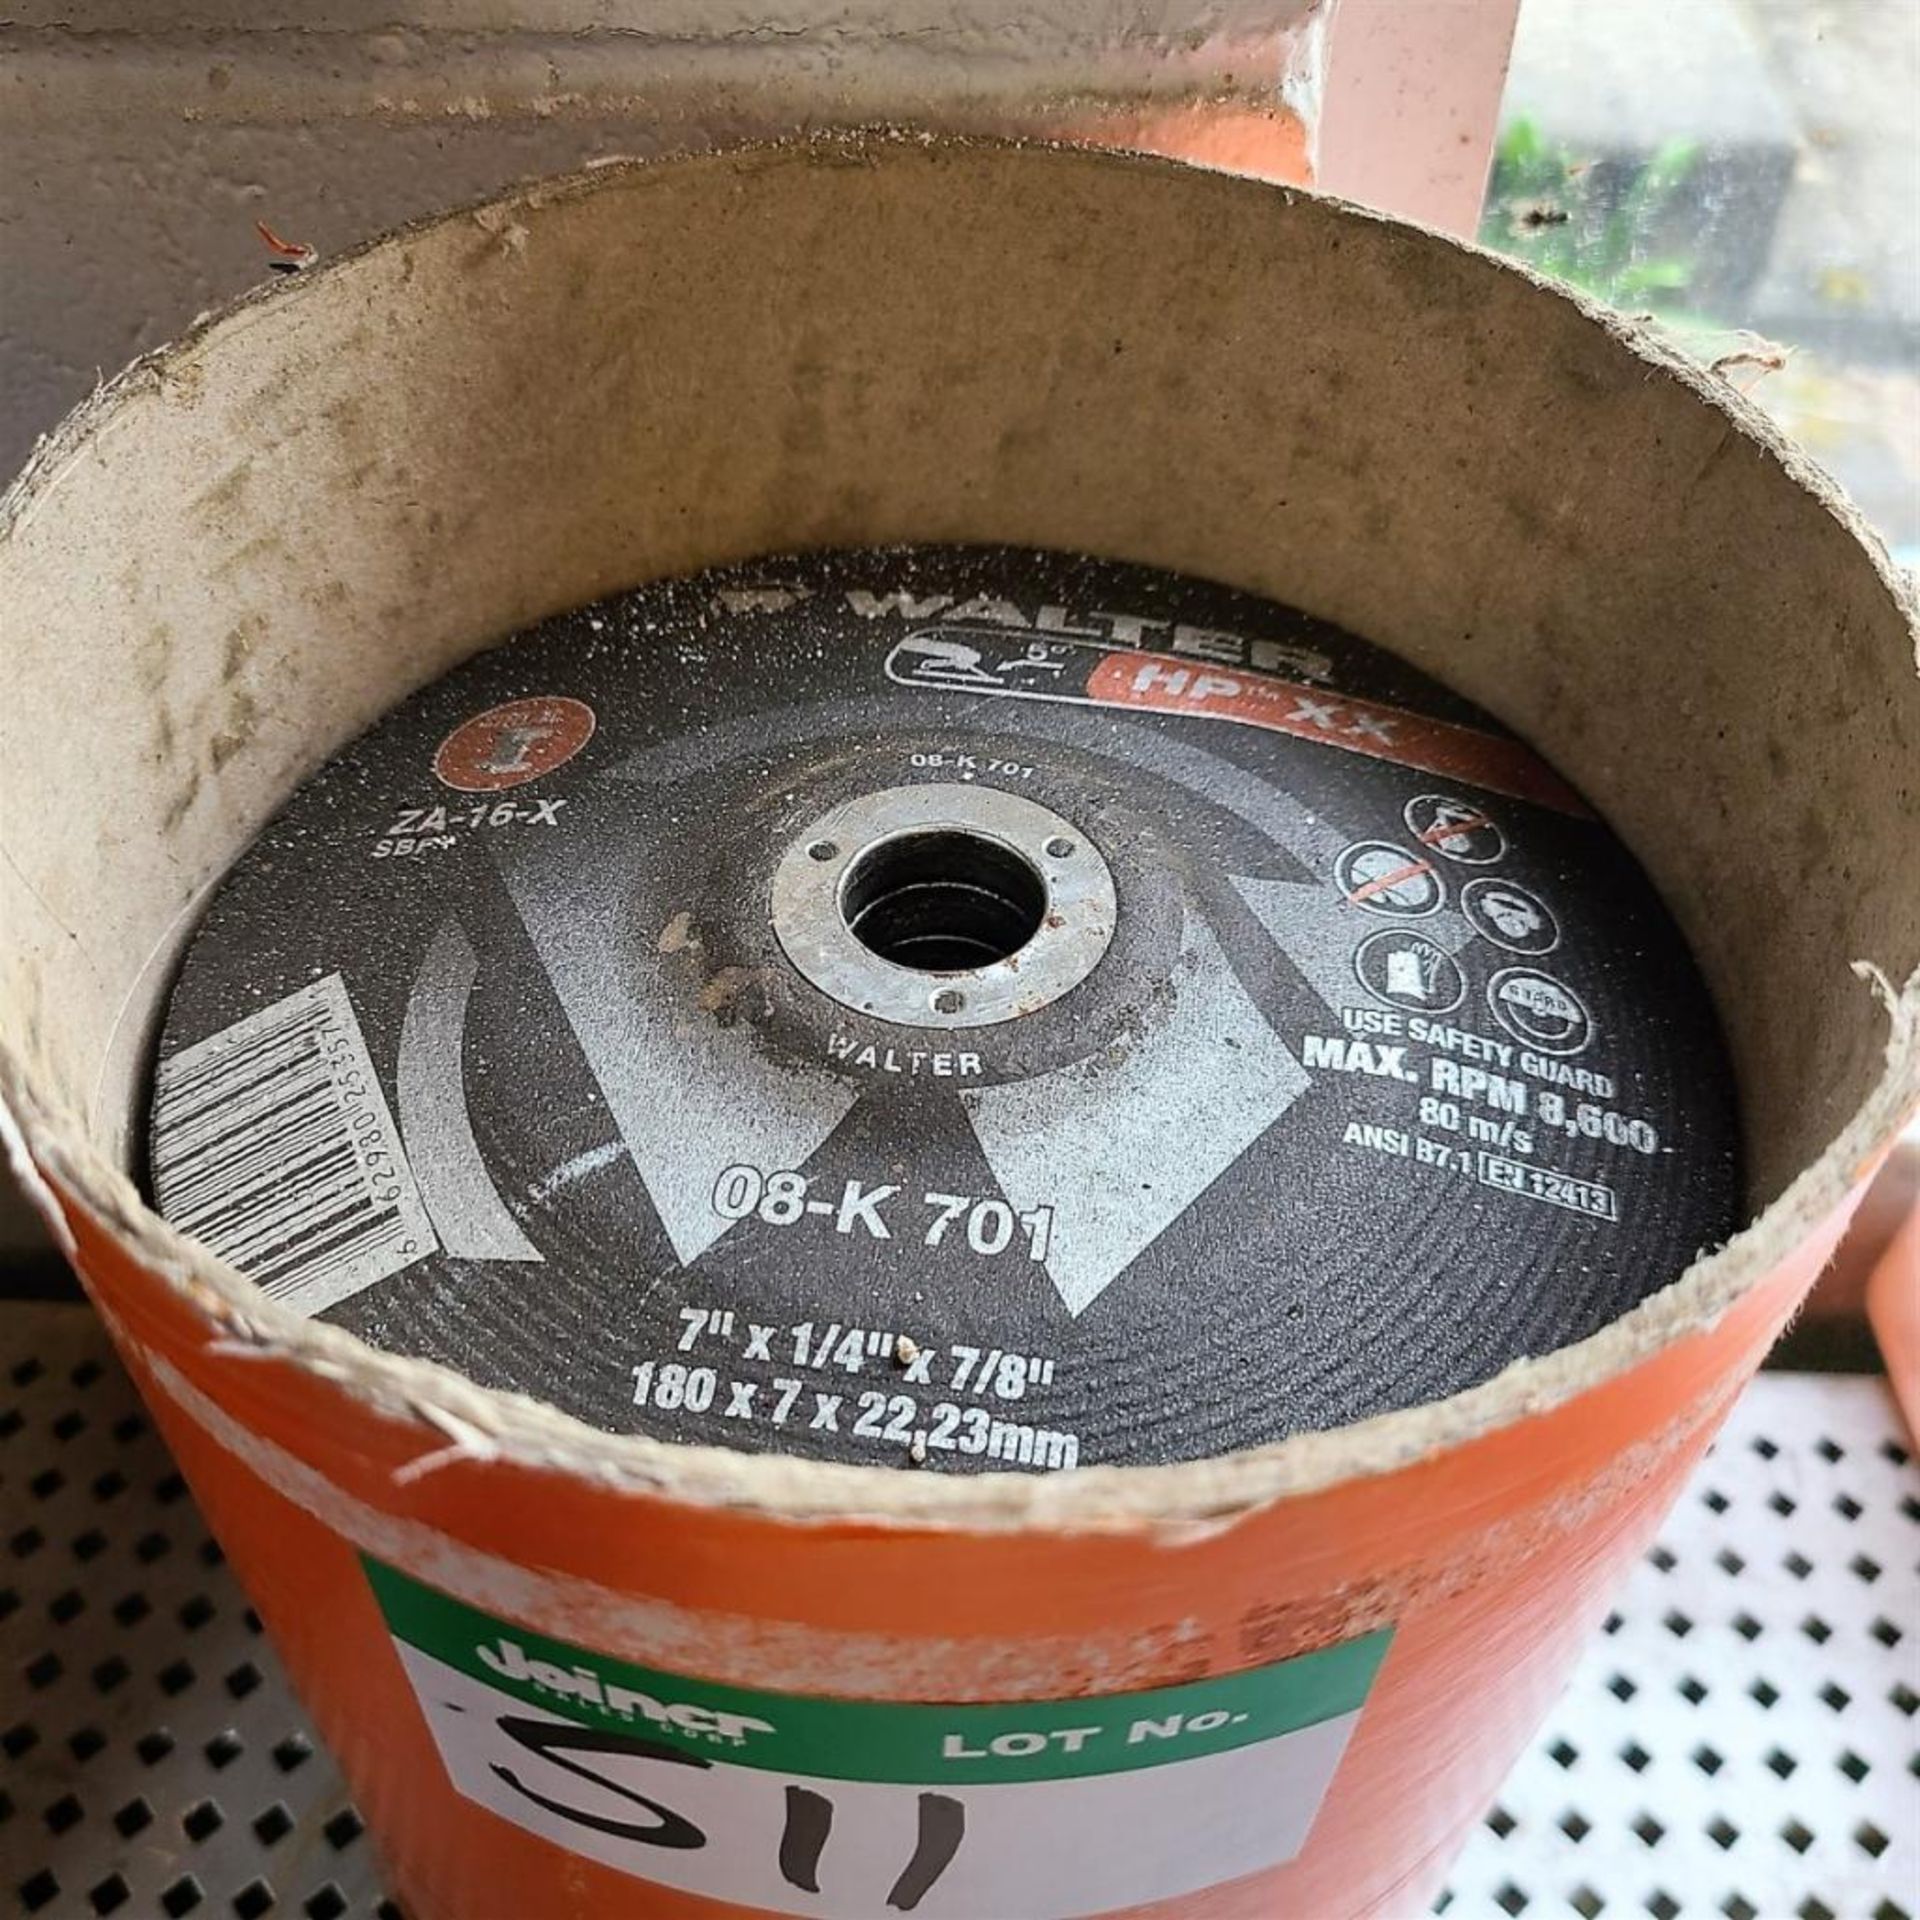 CONTAINER OF WALTER GRINDING DISC'S - Image 2 of 2